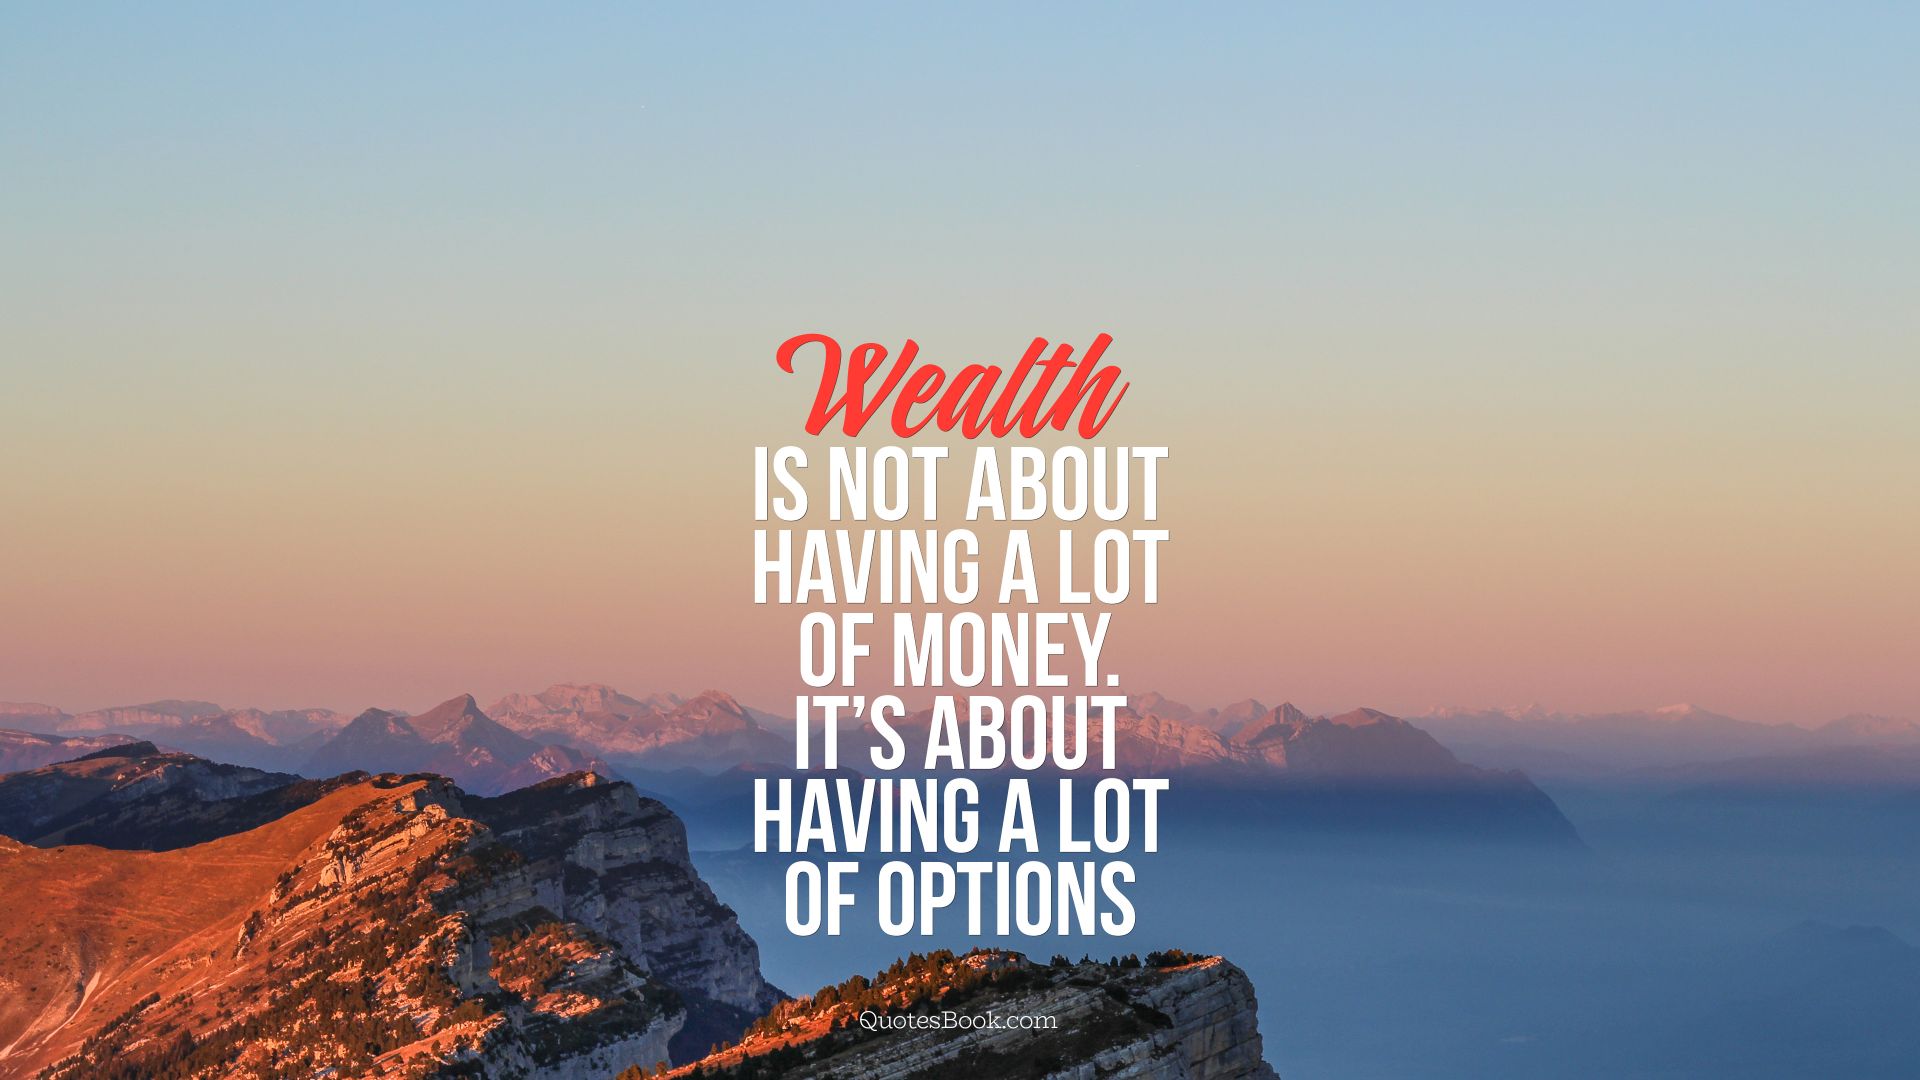 Wealth is not about having a lot of money. It's about having a lot of options